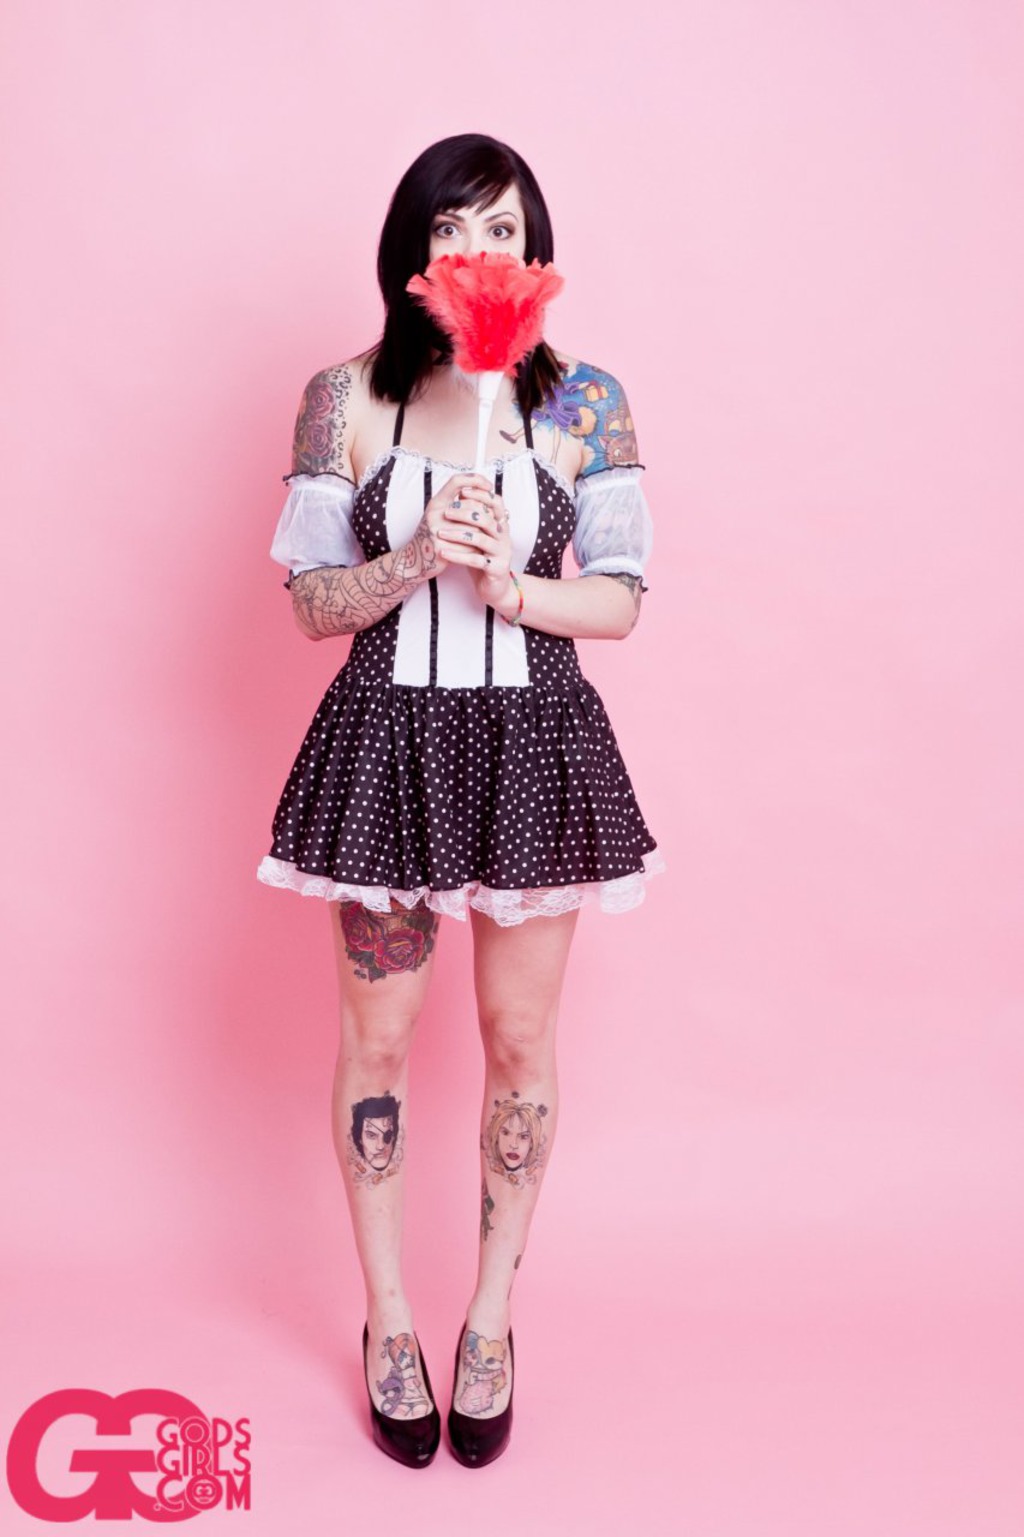 Tattooed Girl In Pink Room 00